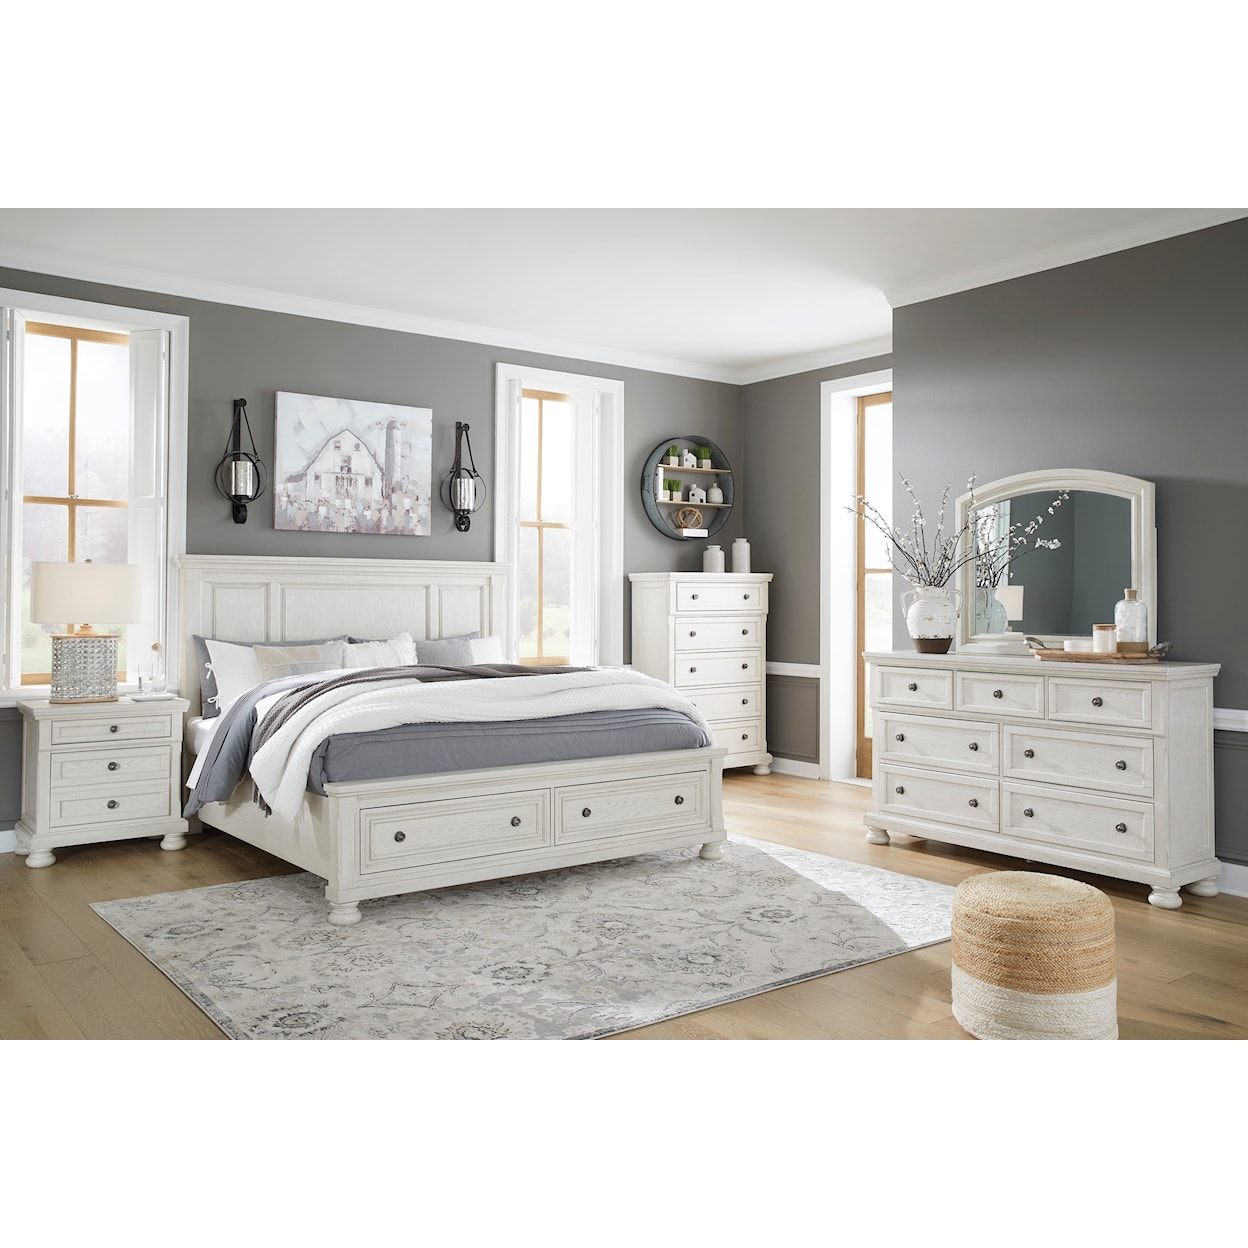 Signature Design by Ashley Robbinsdale 6 Piece King Bedroom Set